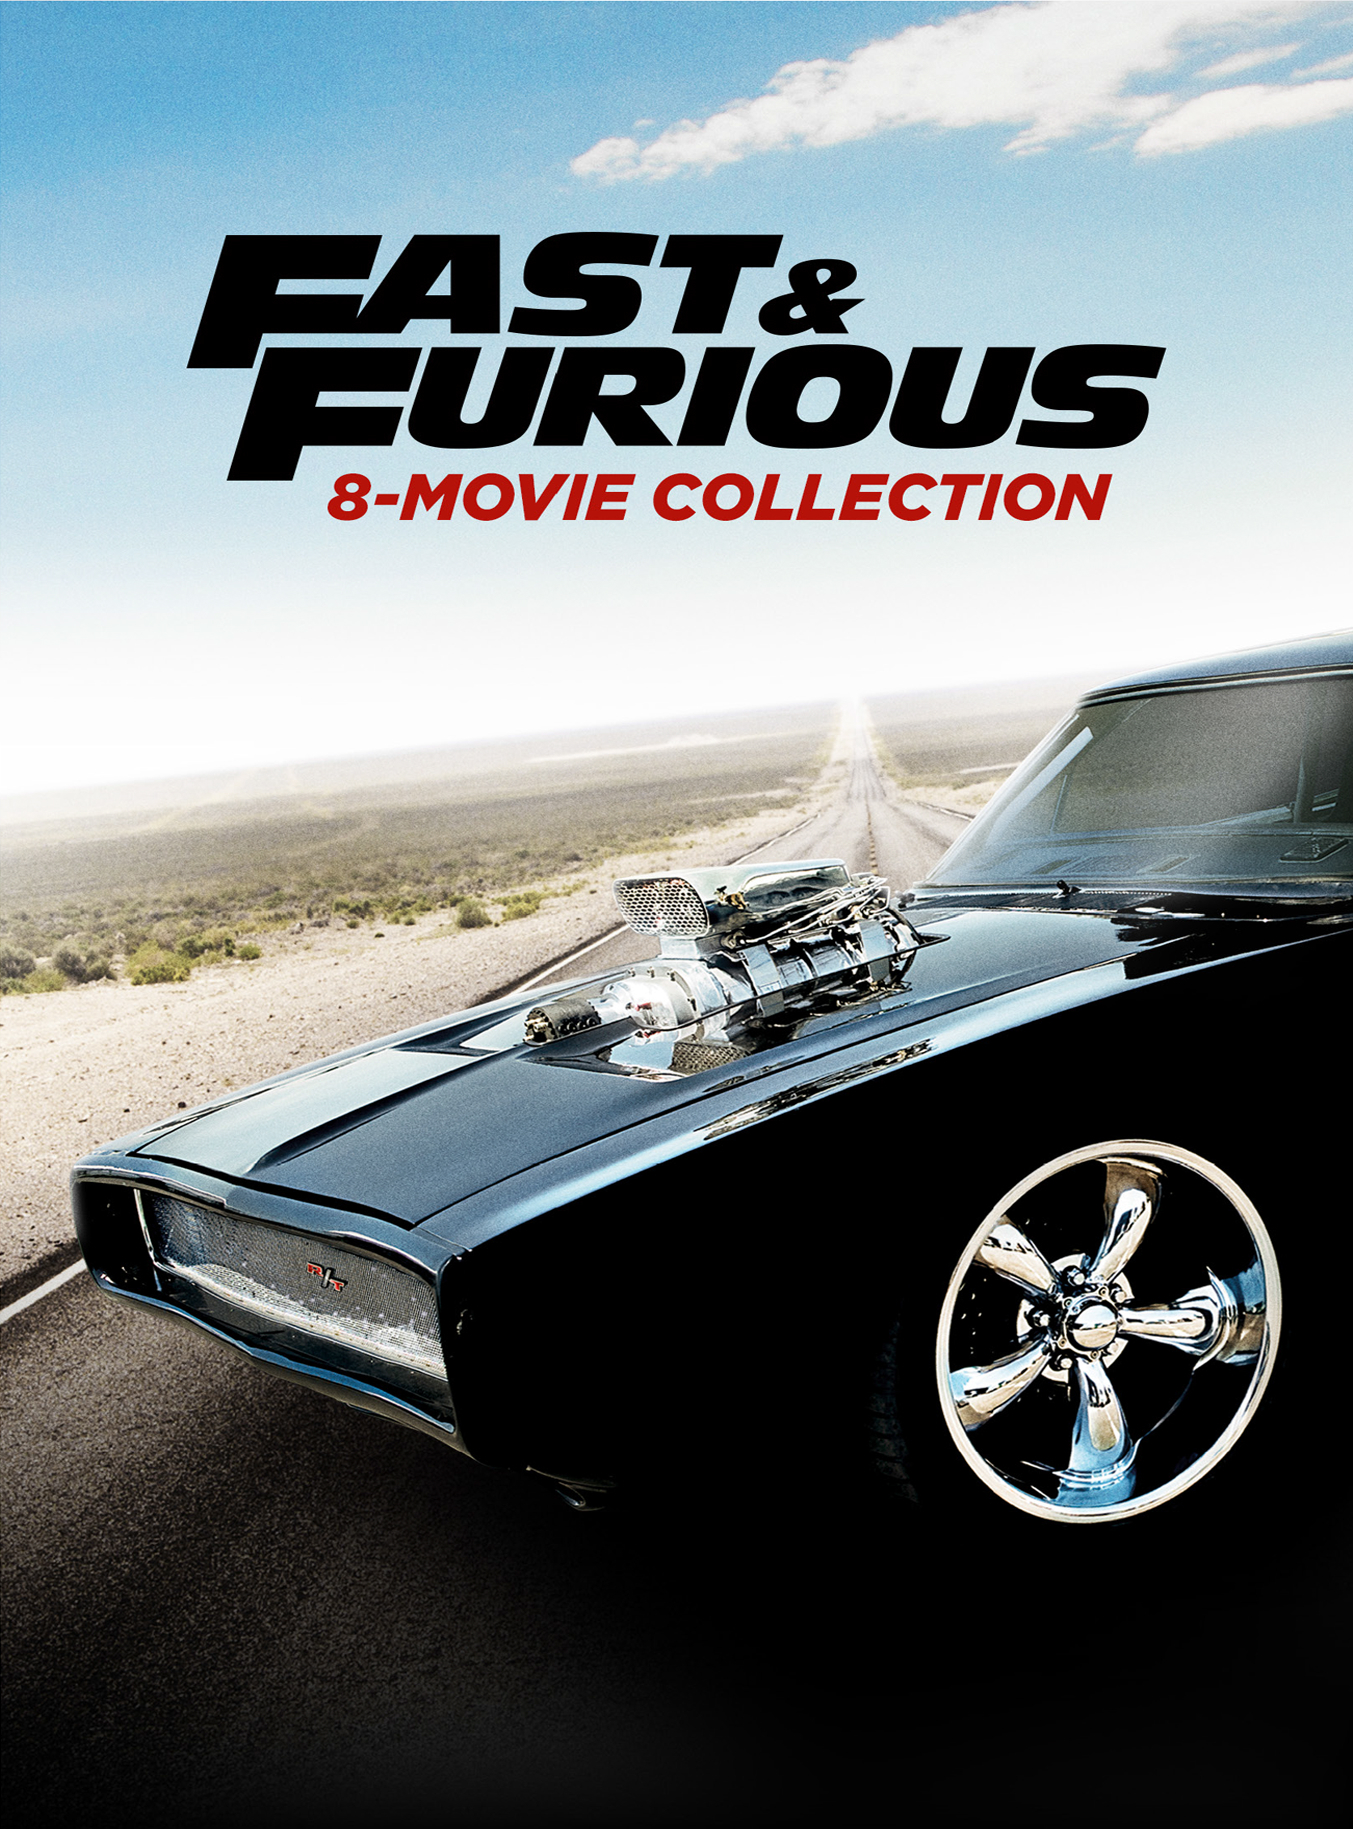 Fast & Furious: 8-movie Collection - DVD [ 2017 ] - Action Movies on DVD